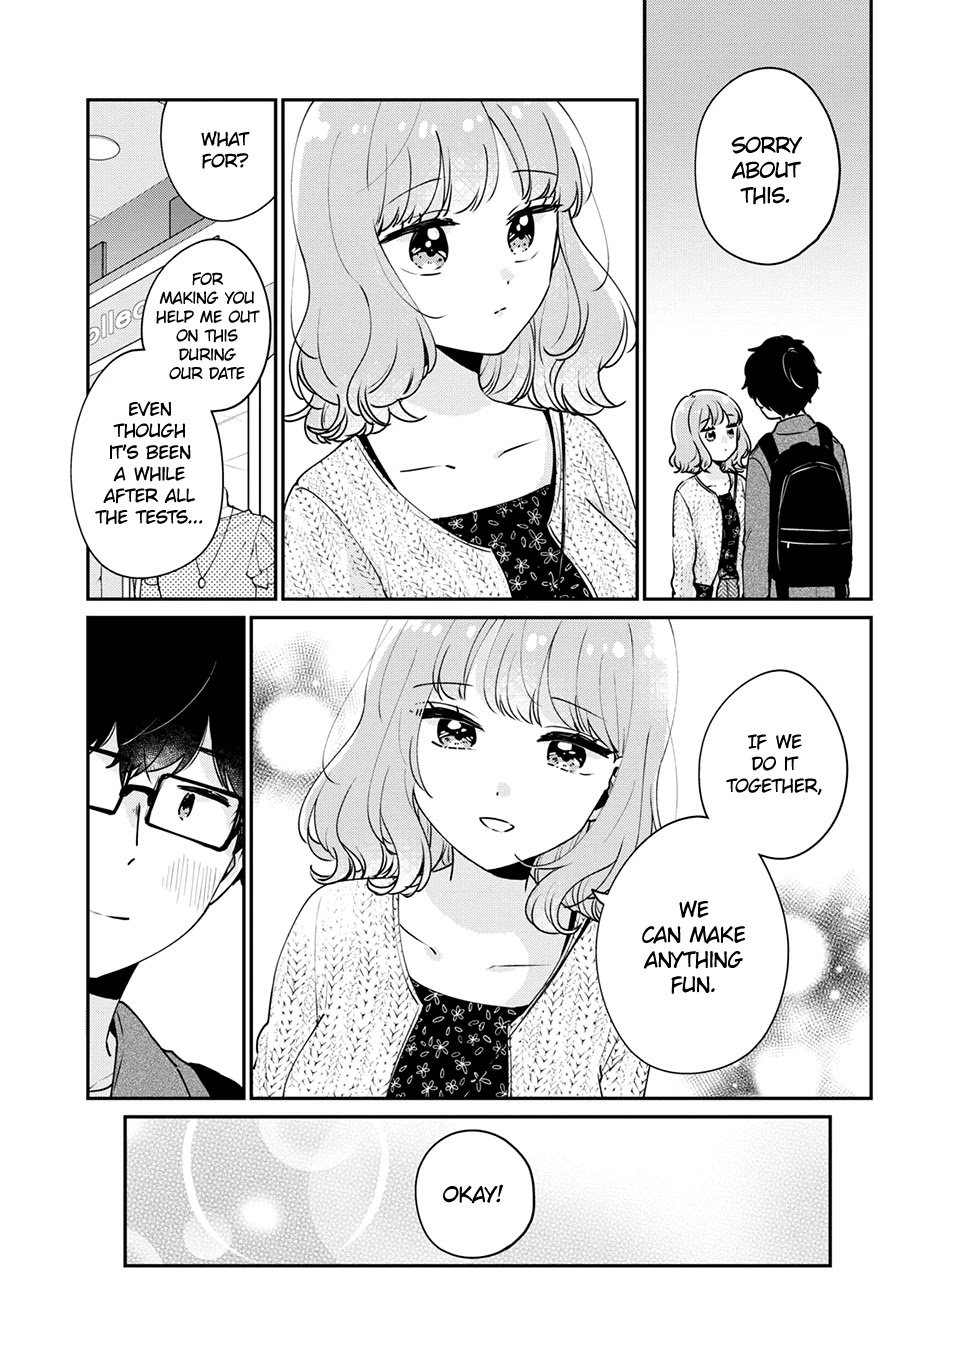 It's Not Meguro-san's First Time chapter 48 page 6